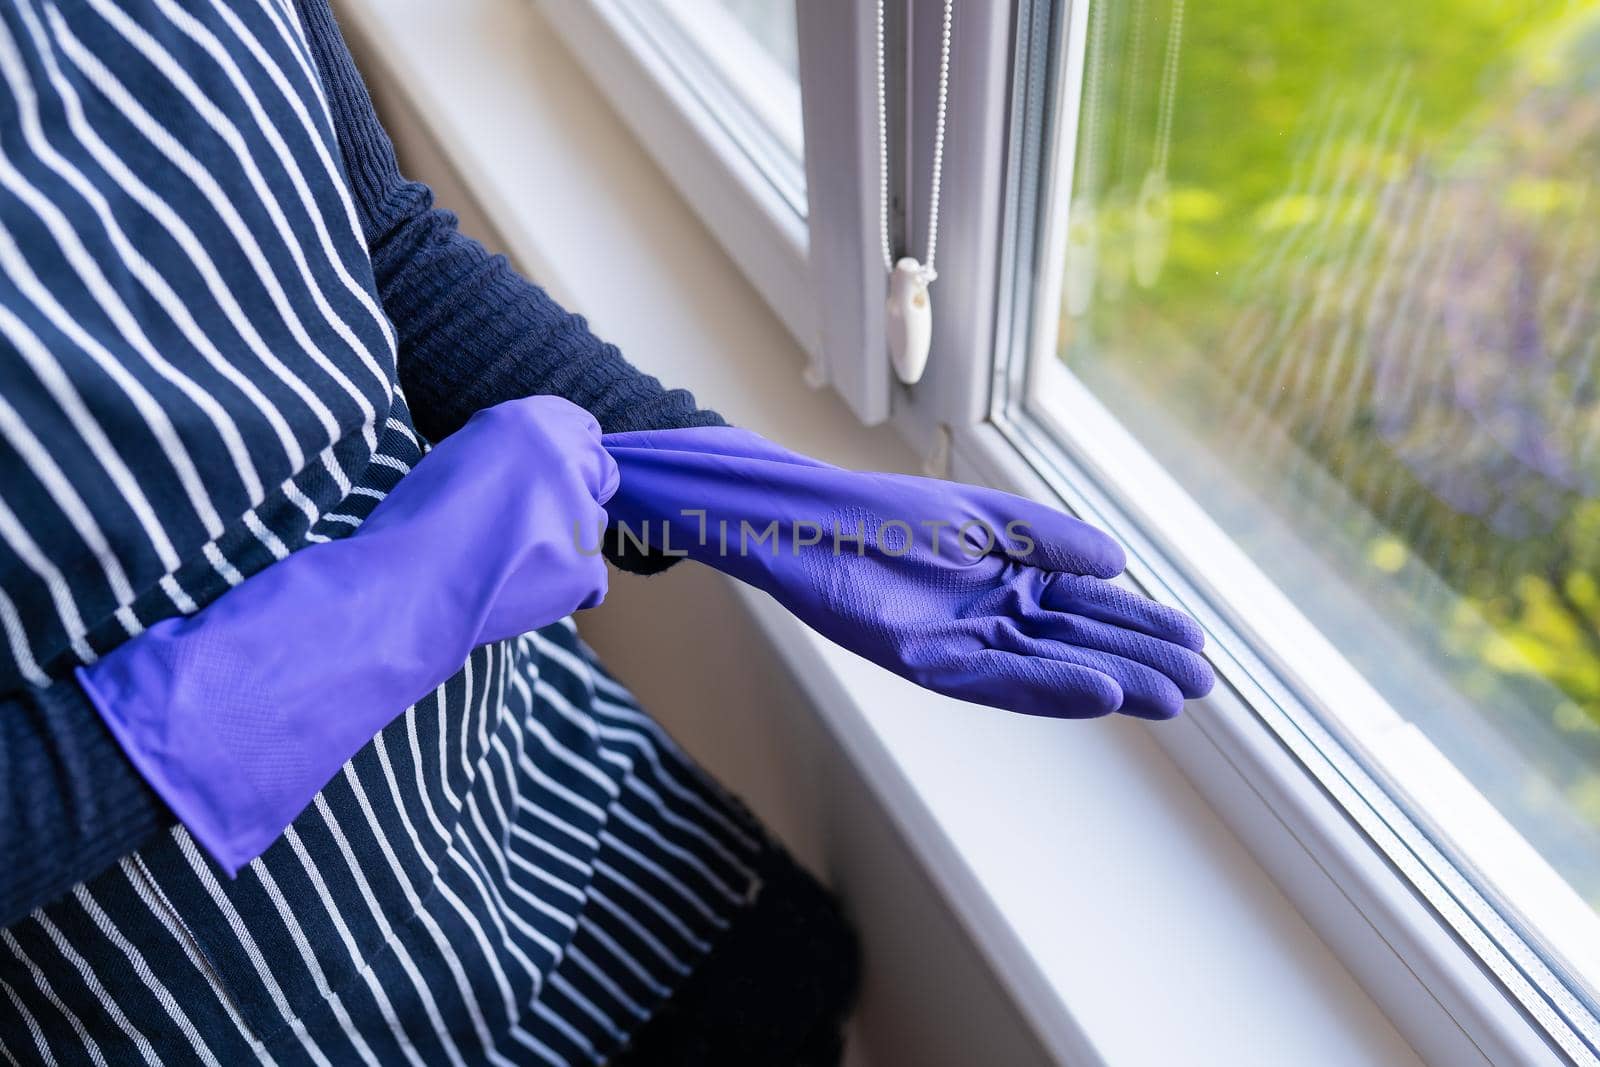 A young girl in a striped apron puts purple gloves on her hands. To prepare for washing windows in an apartment or house. Cleaning and cleaning concept